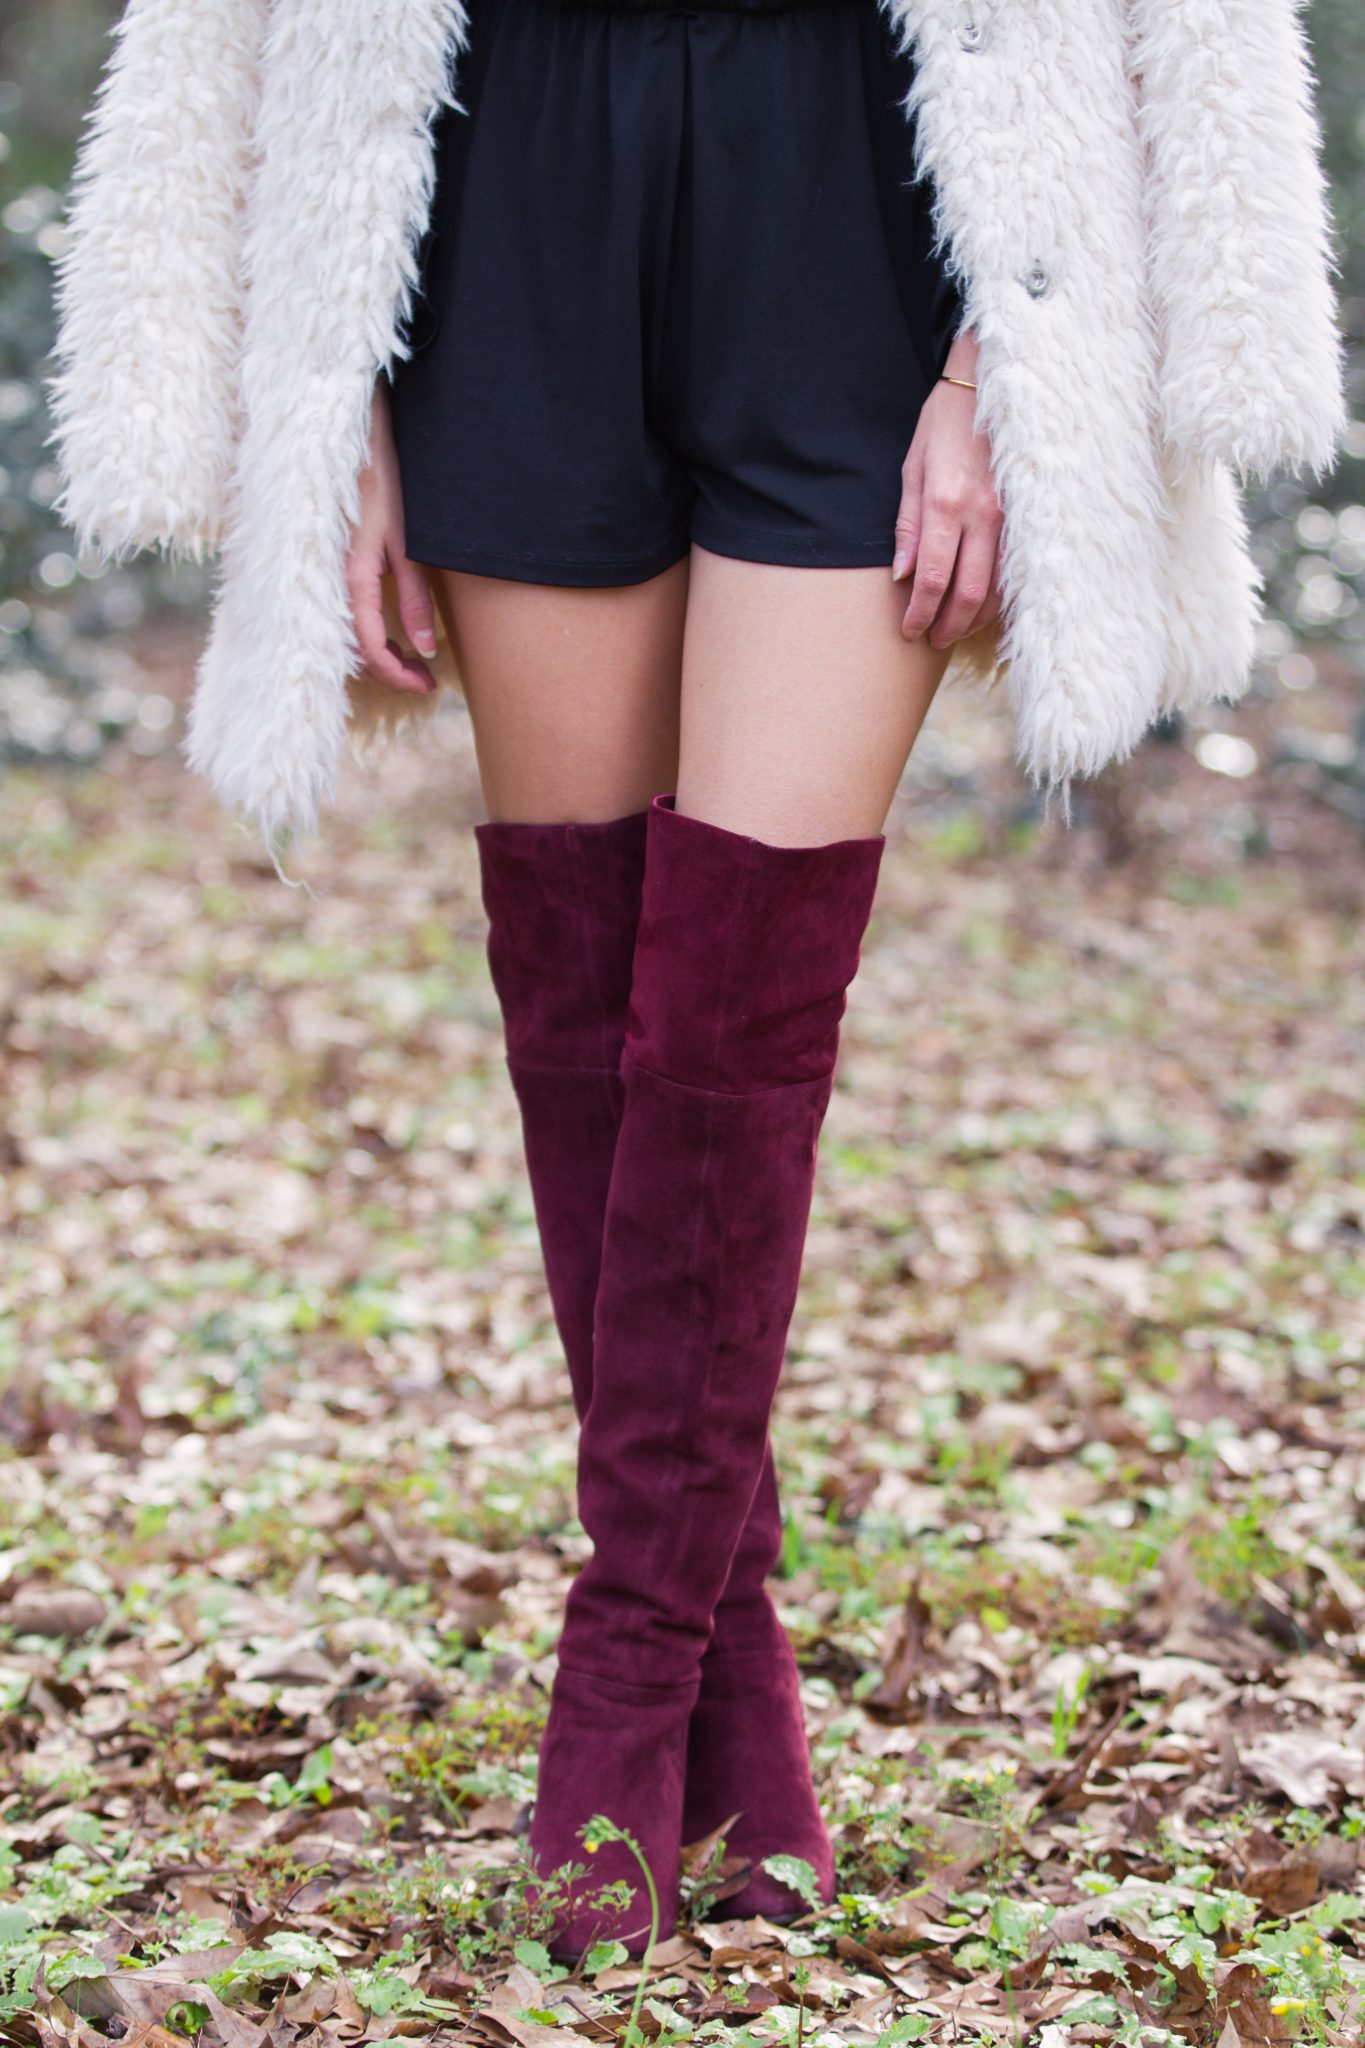 how to wear a romper in the winter, how to style a romper for winter, furry coat, big fuzzy coat, burgundy over the knee boots, chic winter style